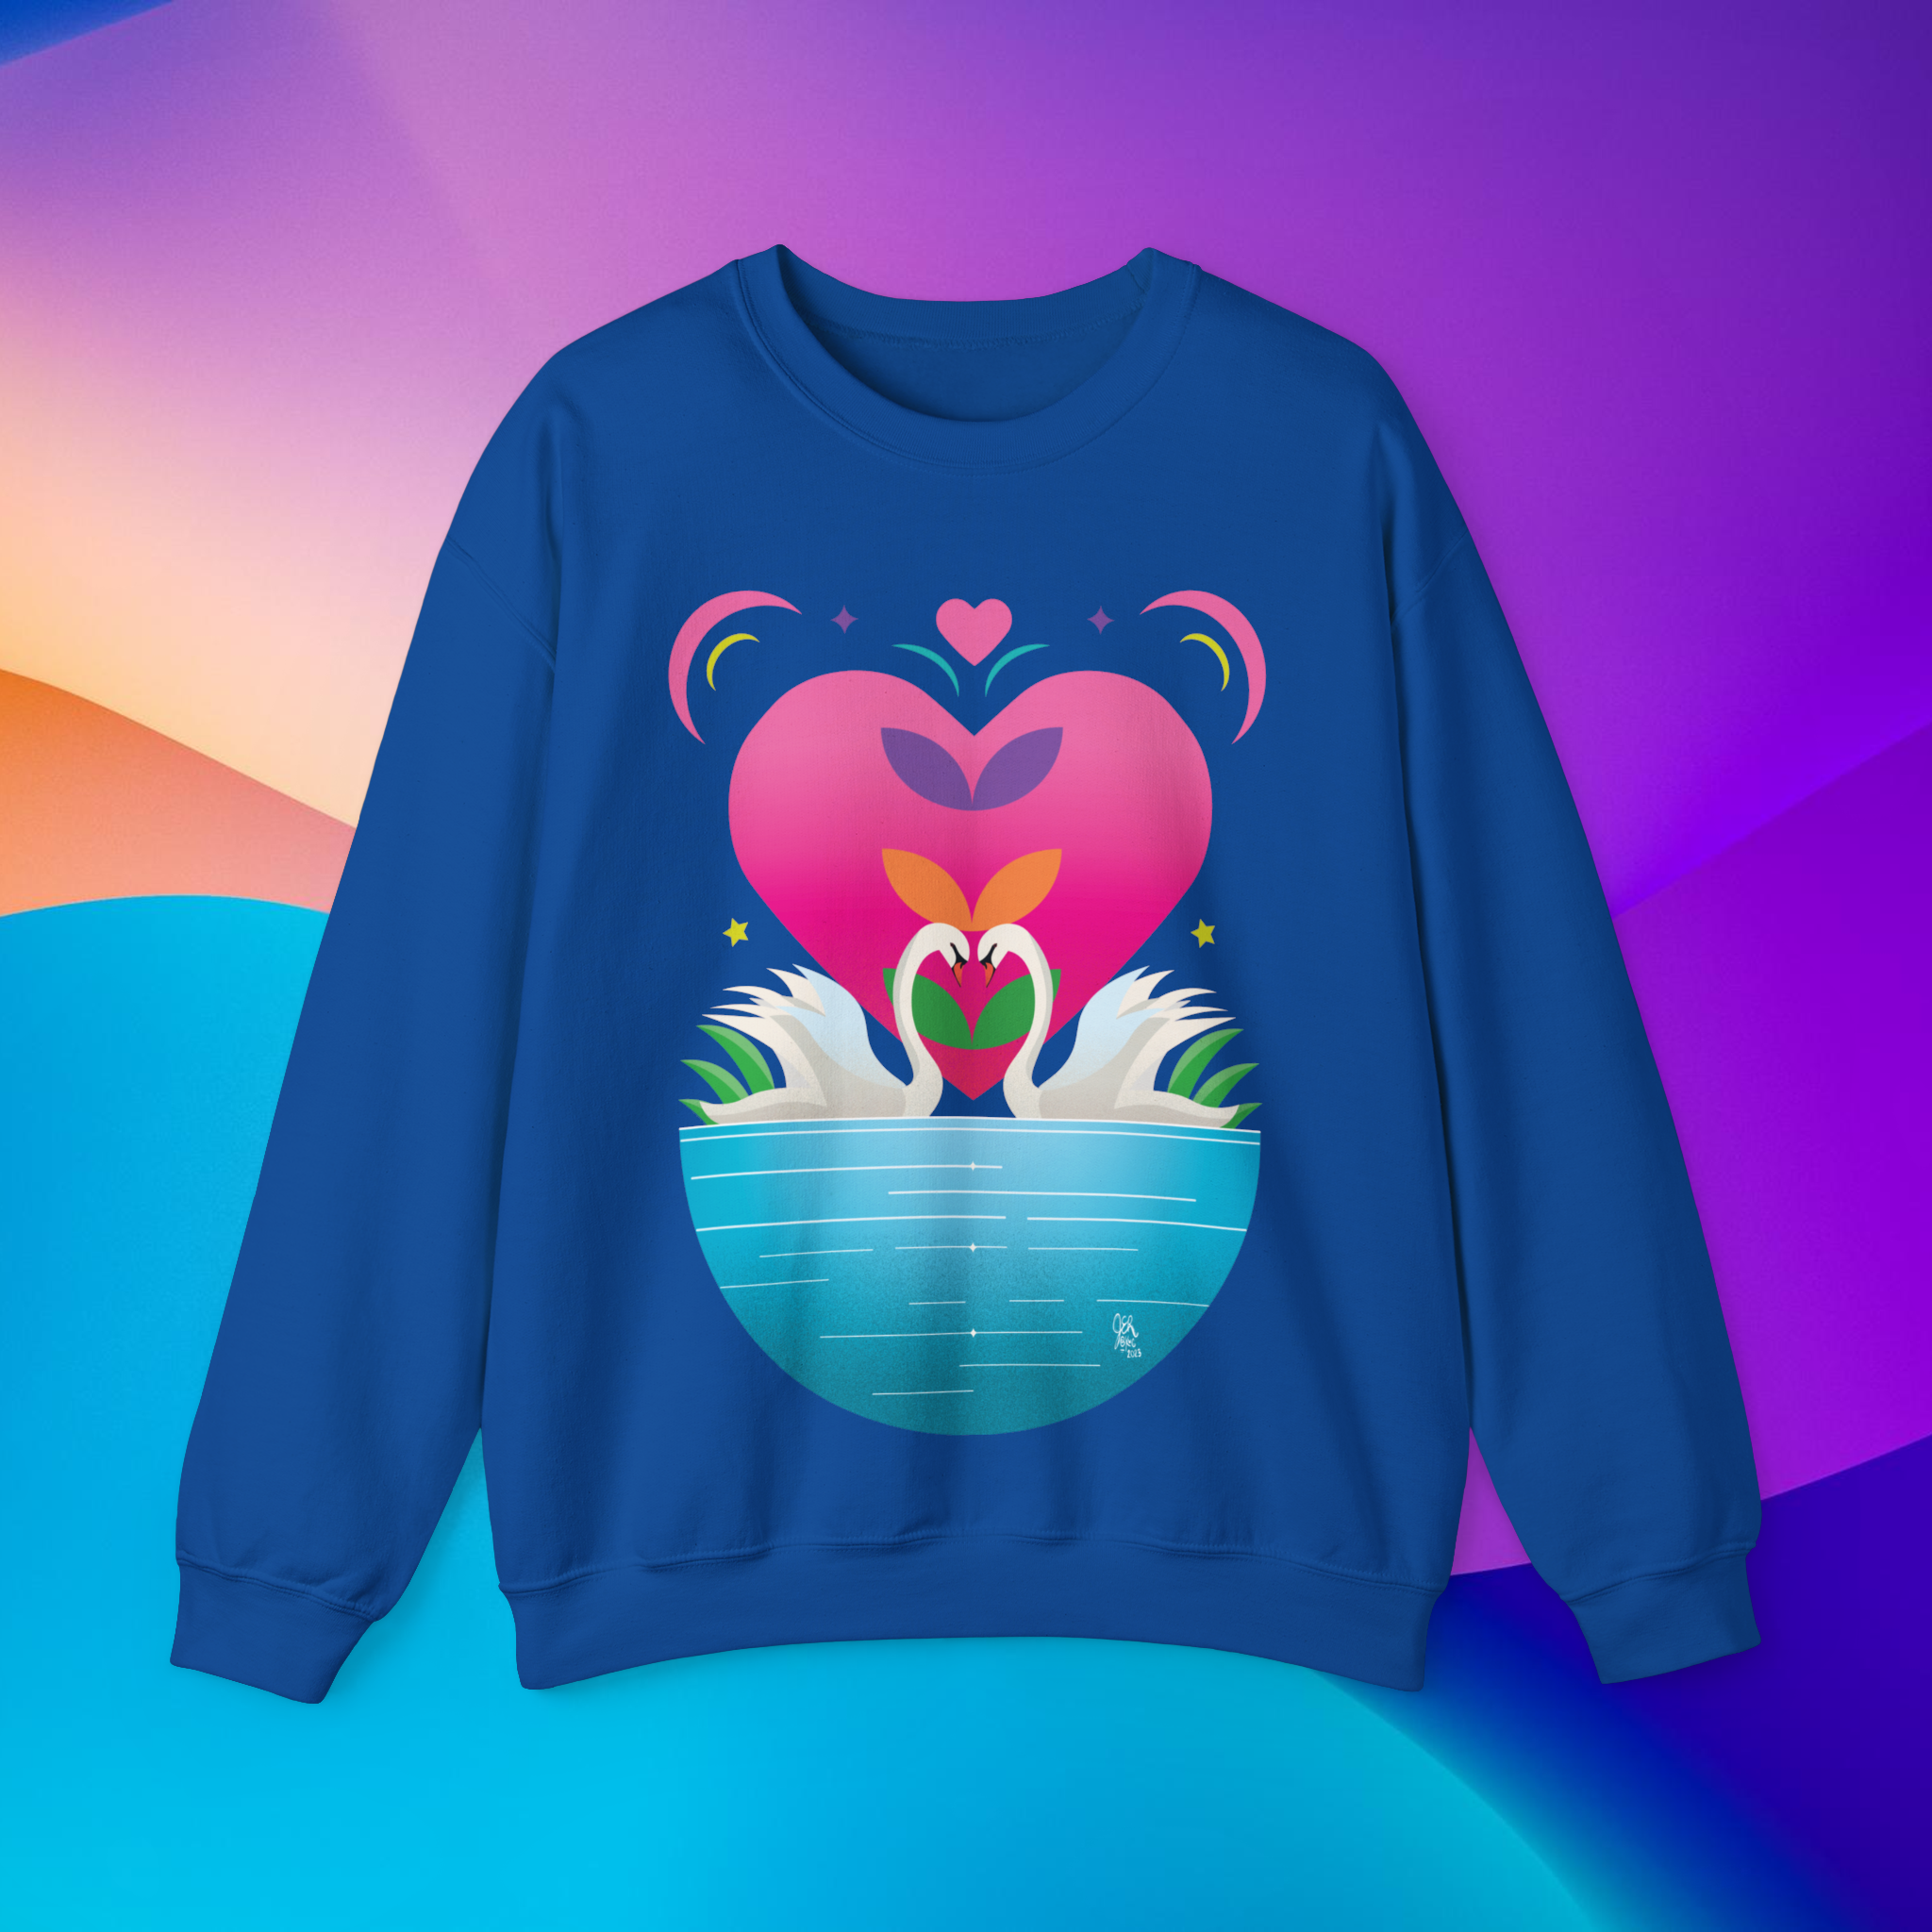 blue sweatshirt with a pink love swans design on it